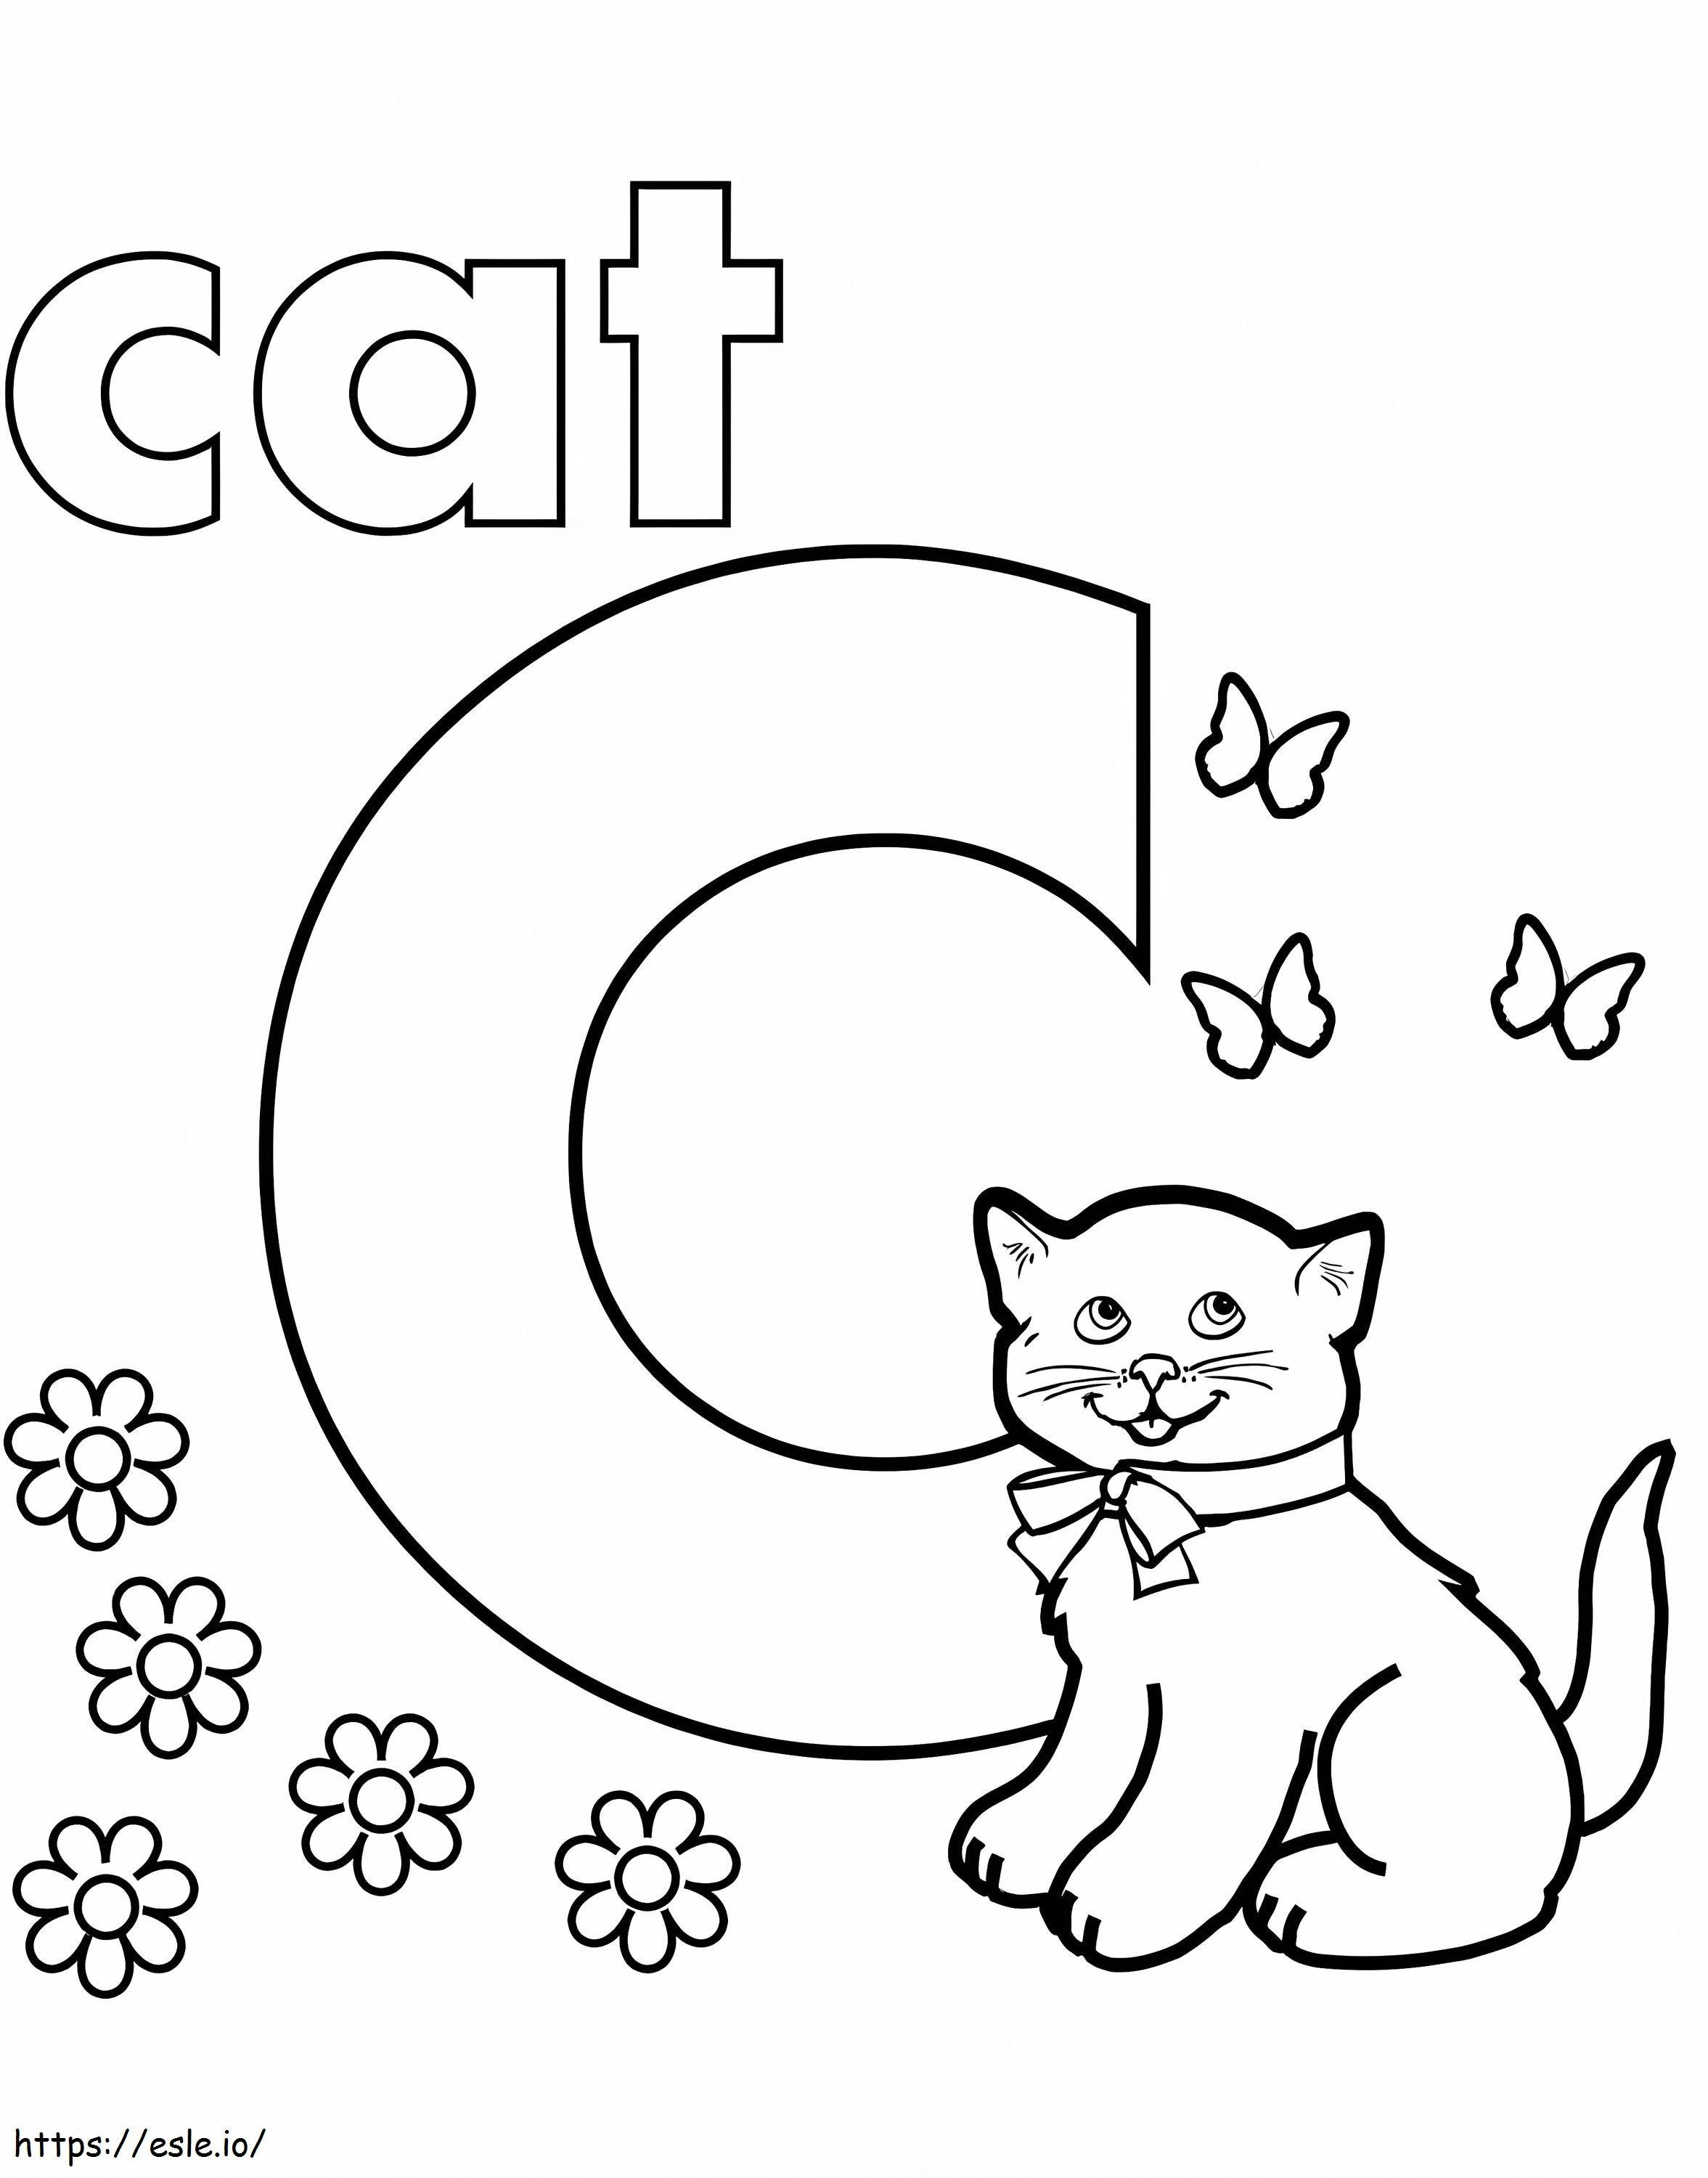 Letter C 2 coloring page